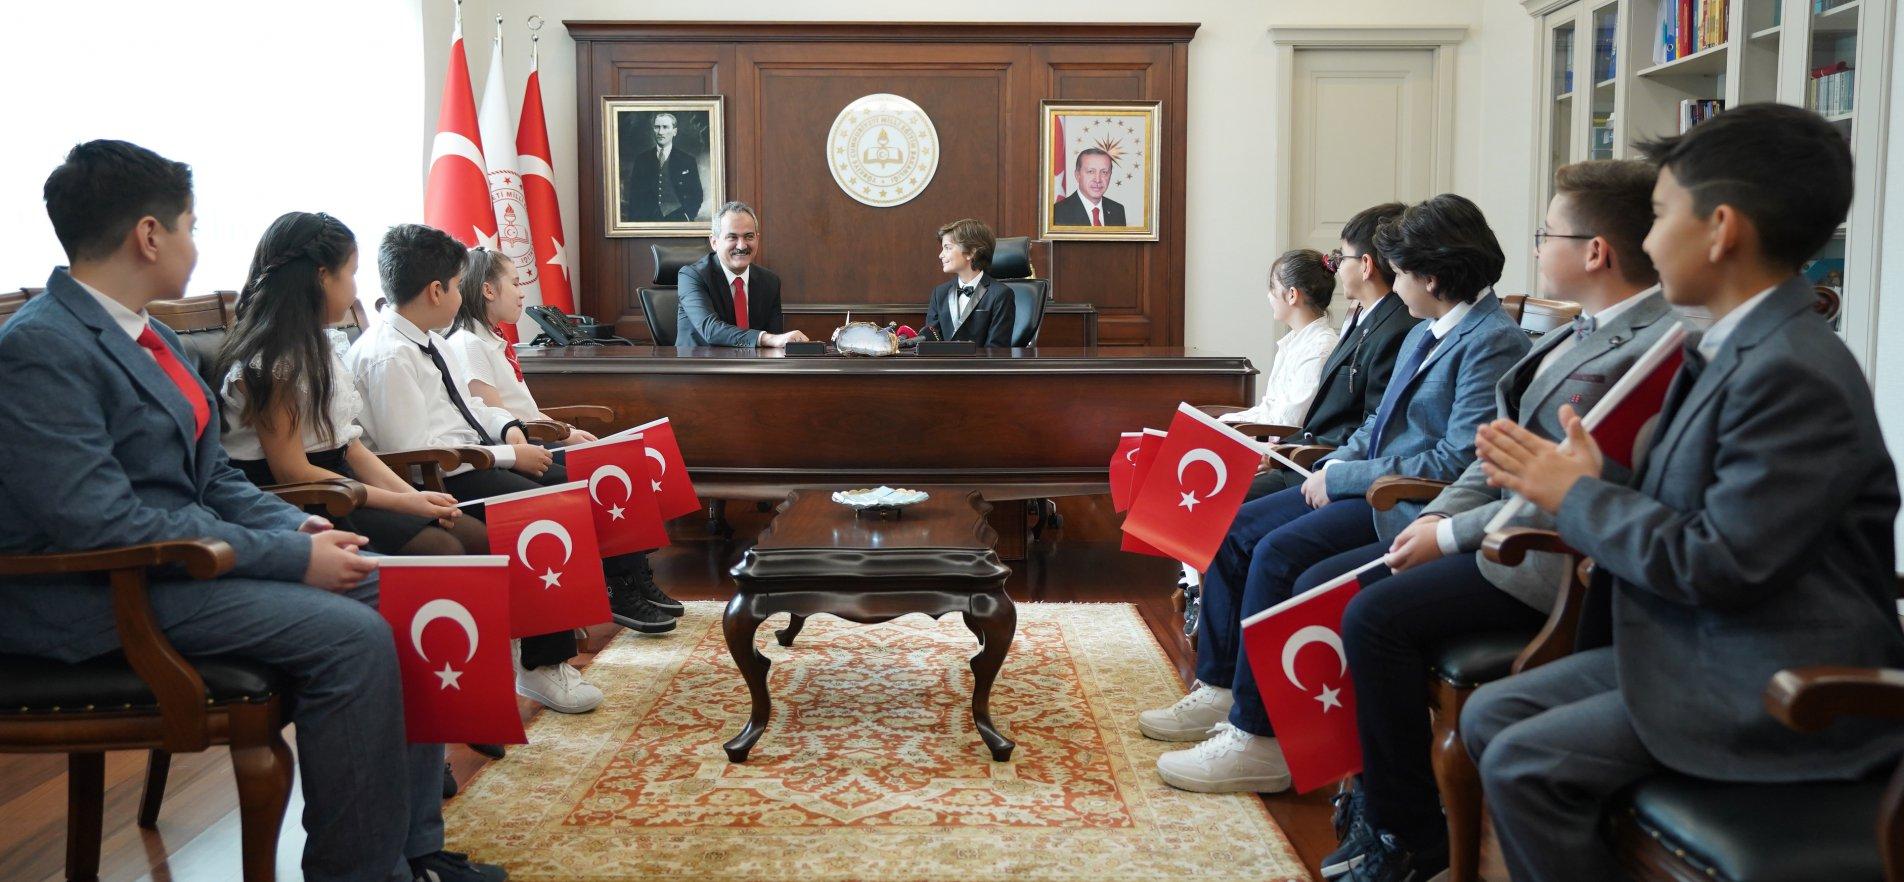 MINISTER OZER RECEIVES THE CHILDREN REPRESENTING 81 PROVINCES ON APRIL 23RD NATIONAL SOVEREIGNTY AND CHILDREN'S DAY